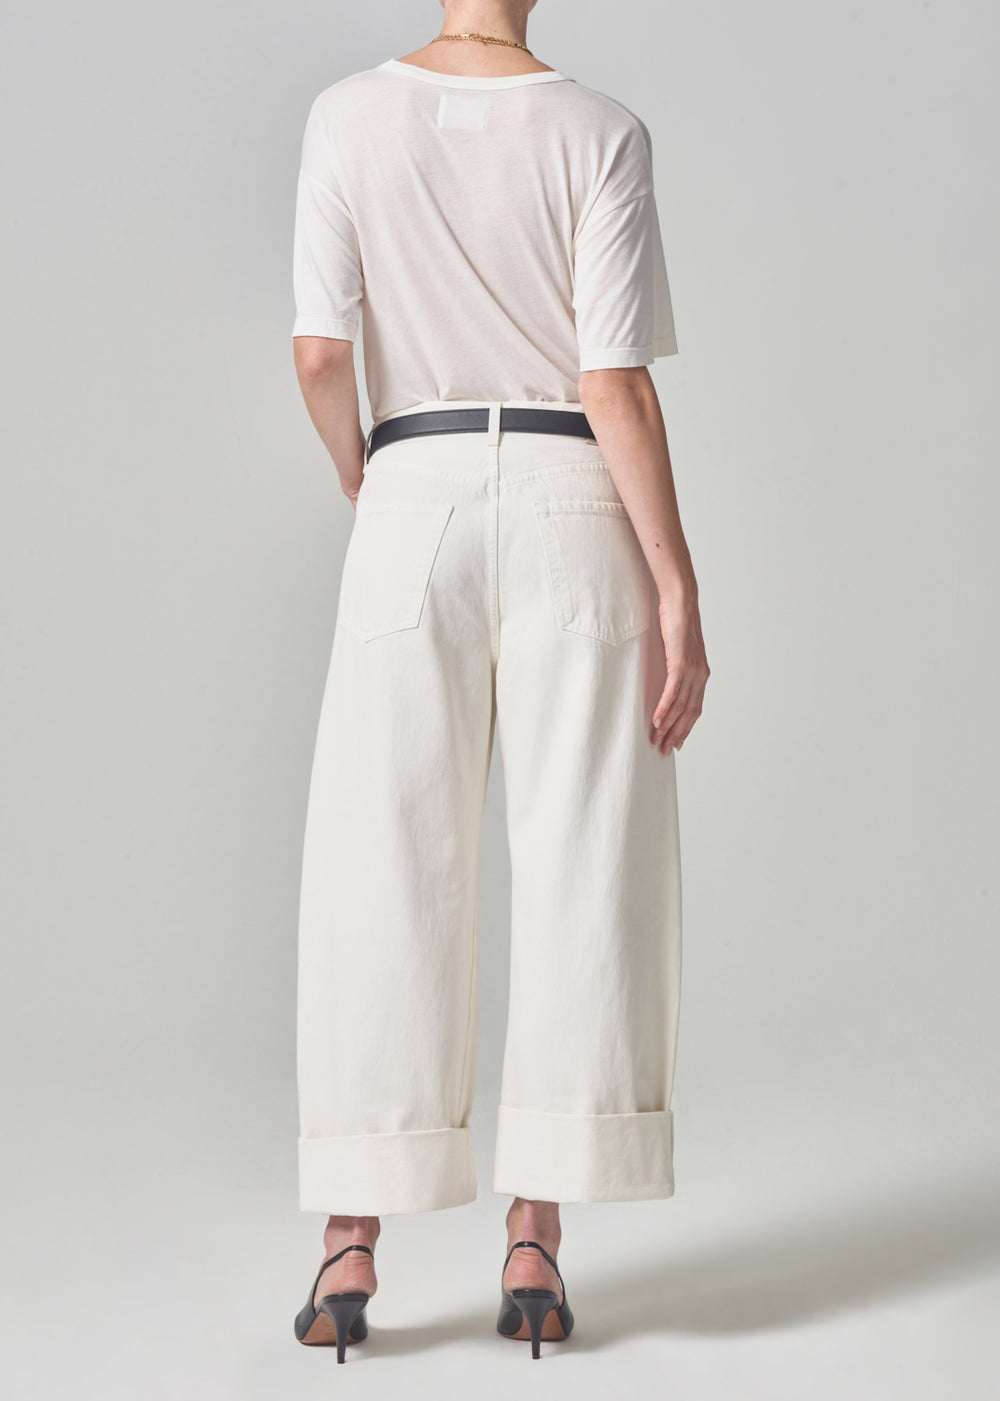 The Citizens of Humanity Ayla Baggy Cuffed Crop Jean in Pashmina available at The New Trend Australia